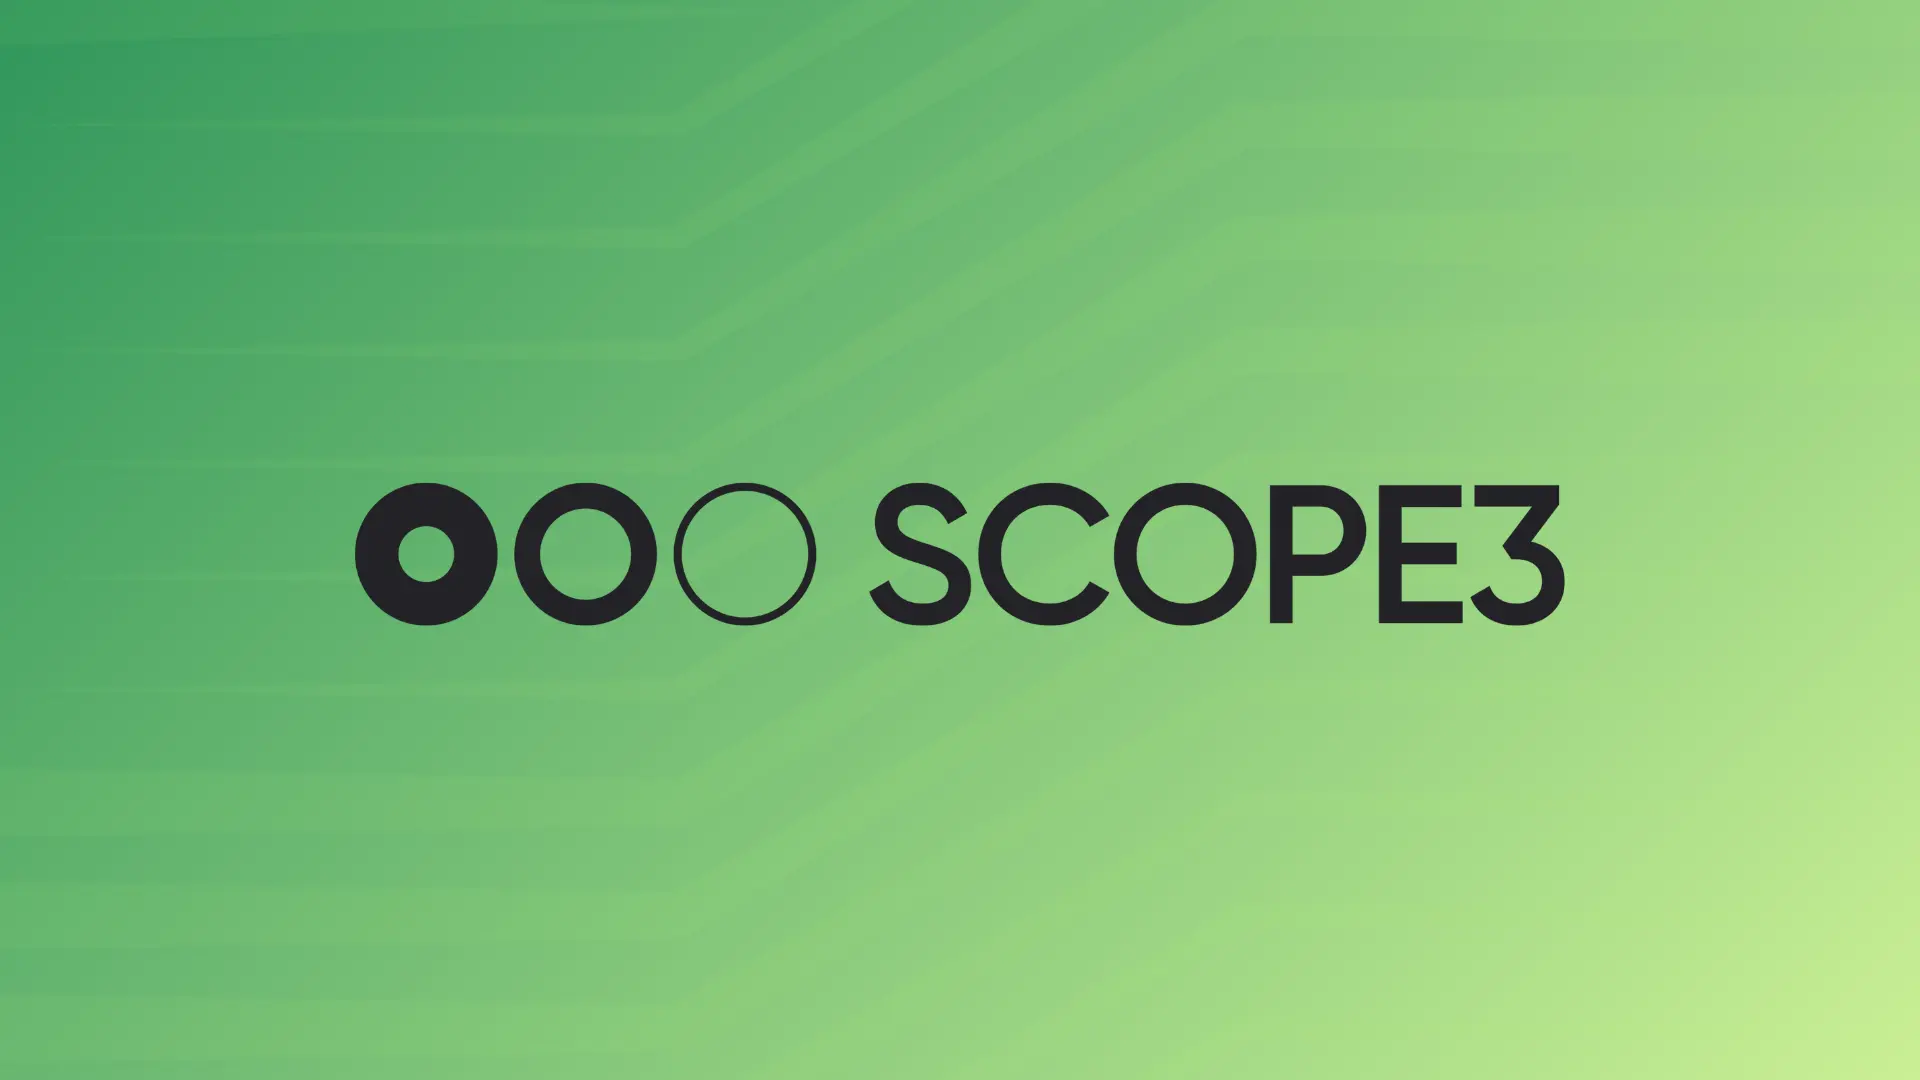 Scope3 raises US$20m of funding to expand decarbonisation efforts